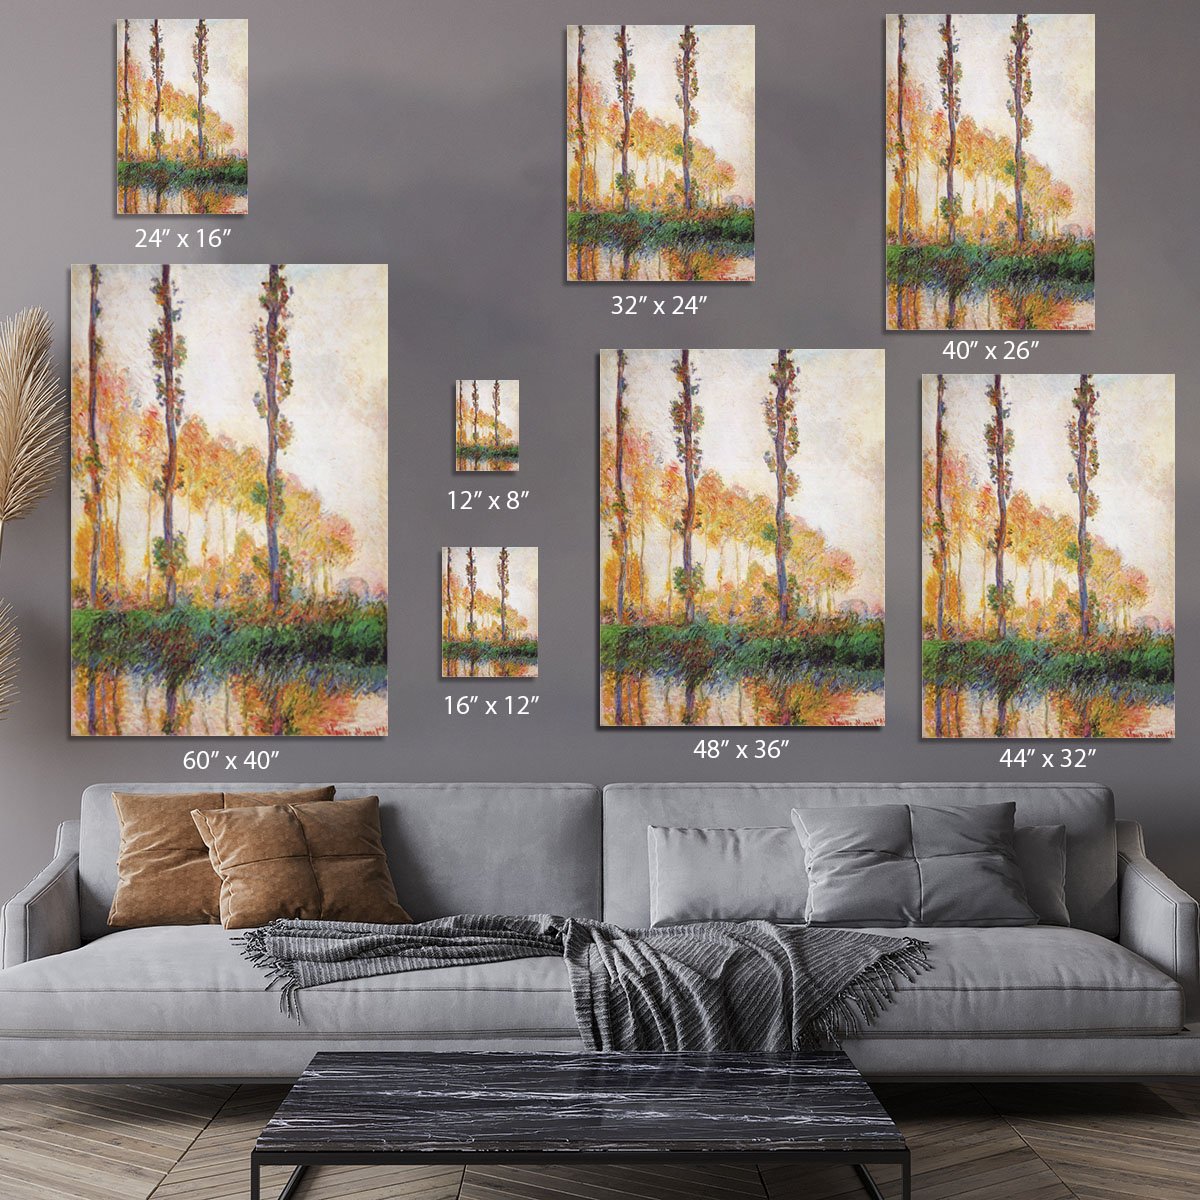 Poplars in Autumn 2 by Monet Canvas Print or Poster